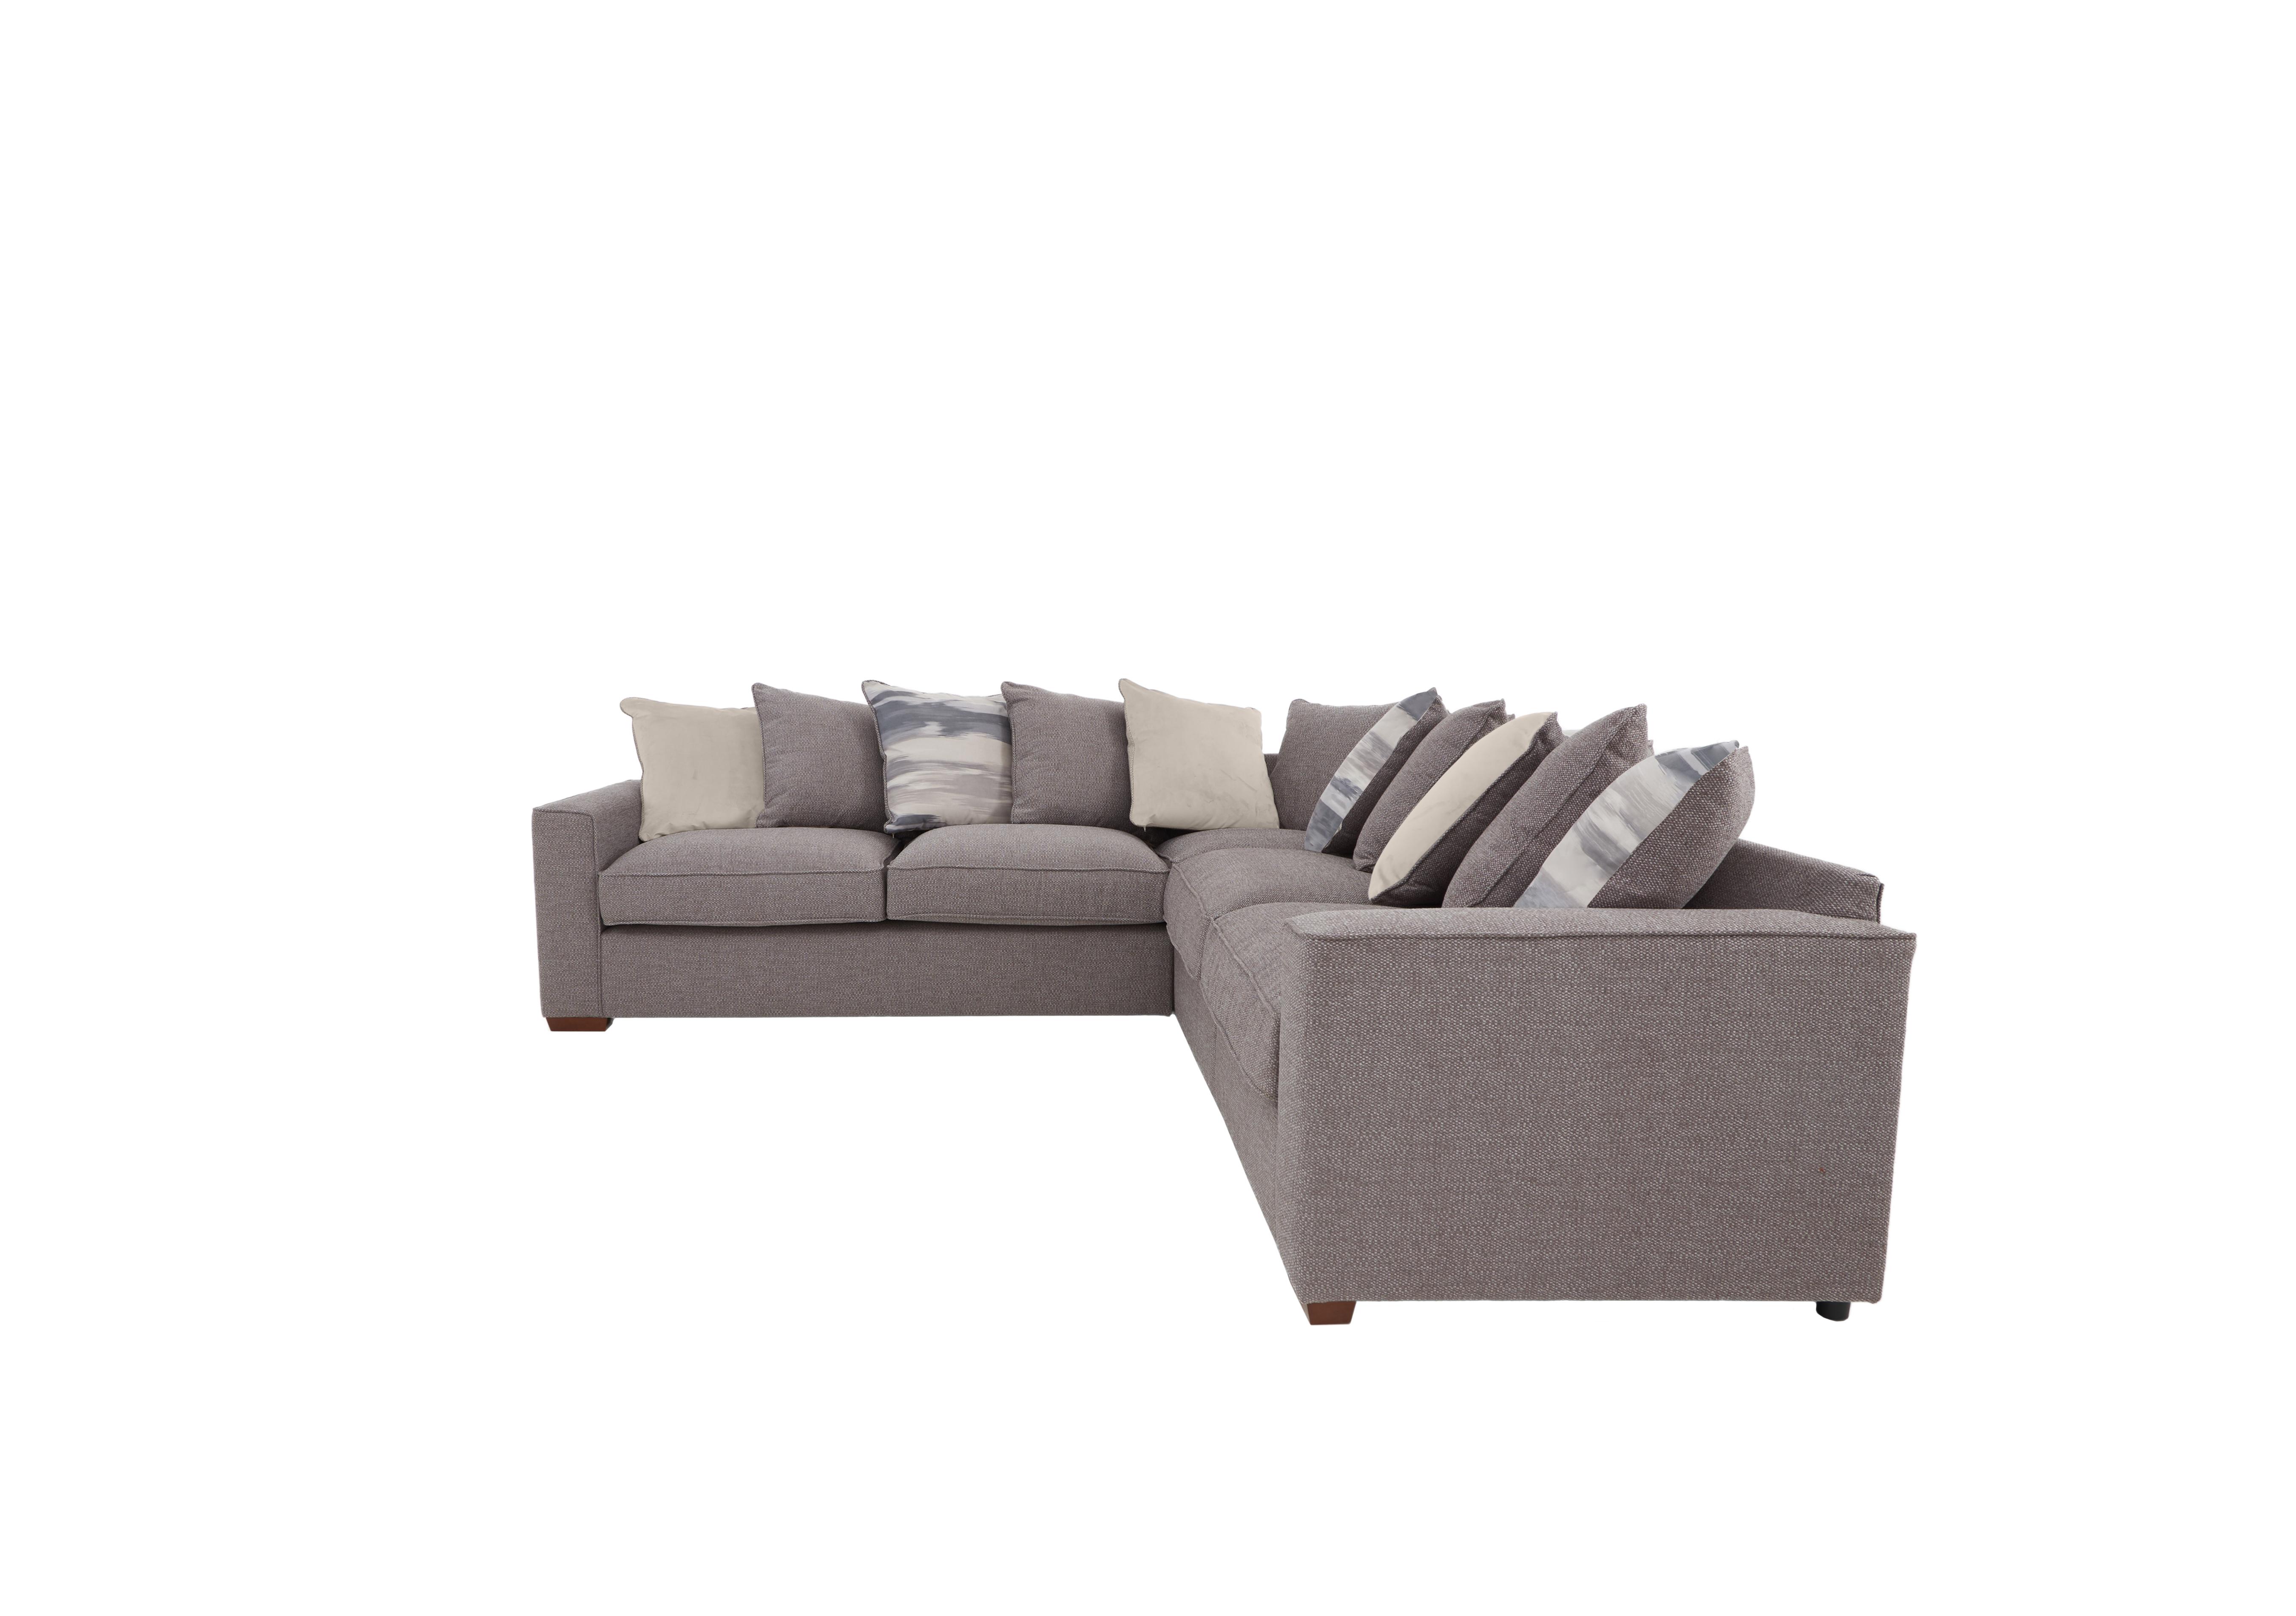 Cory Large Fabric Corner Scatter Back Sofa in Dallas Taupe Taupe Pack on Furniture Village